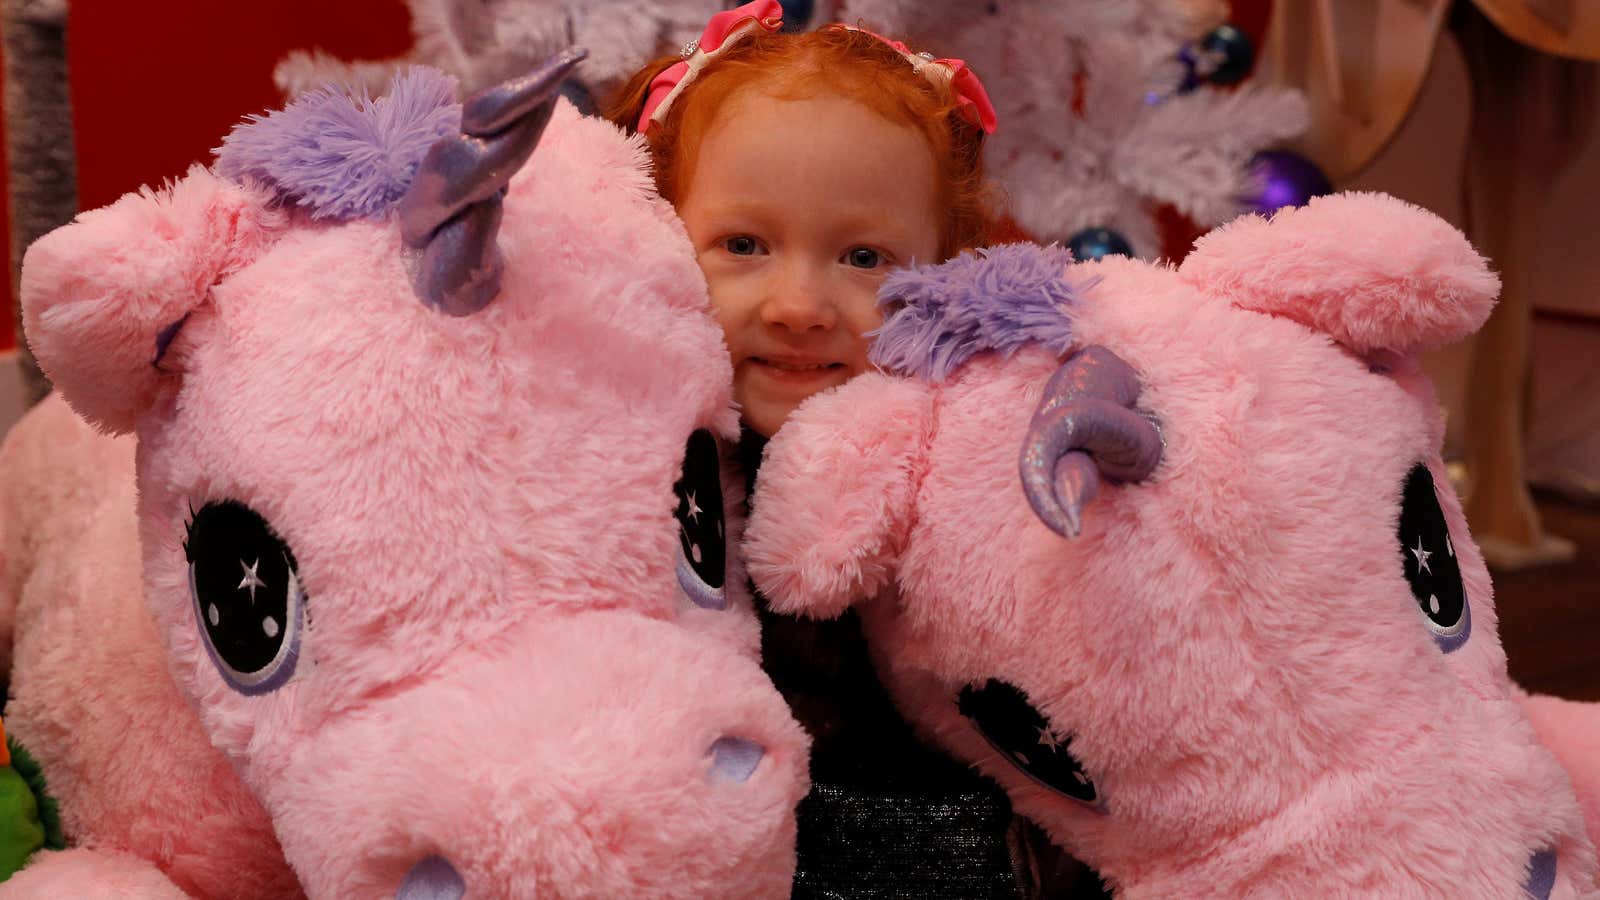 Aston Robertson-Jeyes, 3, plays with Unice Unicorn, at the launch of Hamleys top Christmas toys launch in London, Britain, September 26, 2018. REUTERS/Peter Nicholls – RC145C9E7680